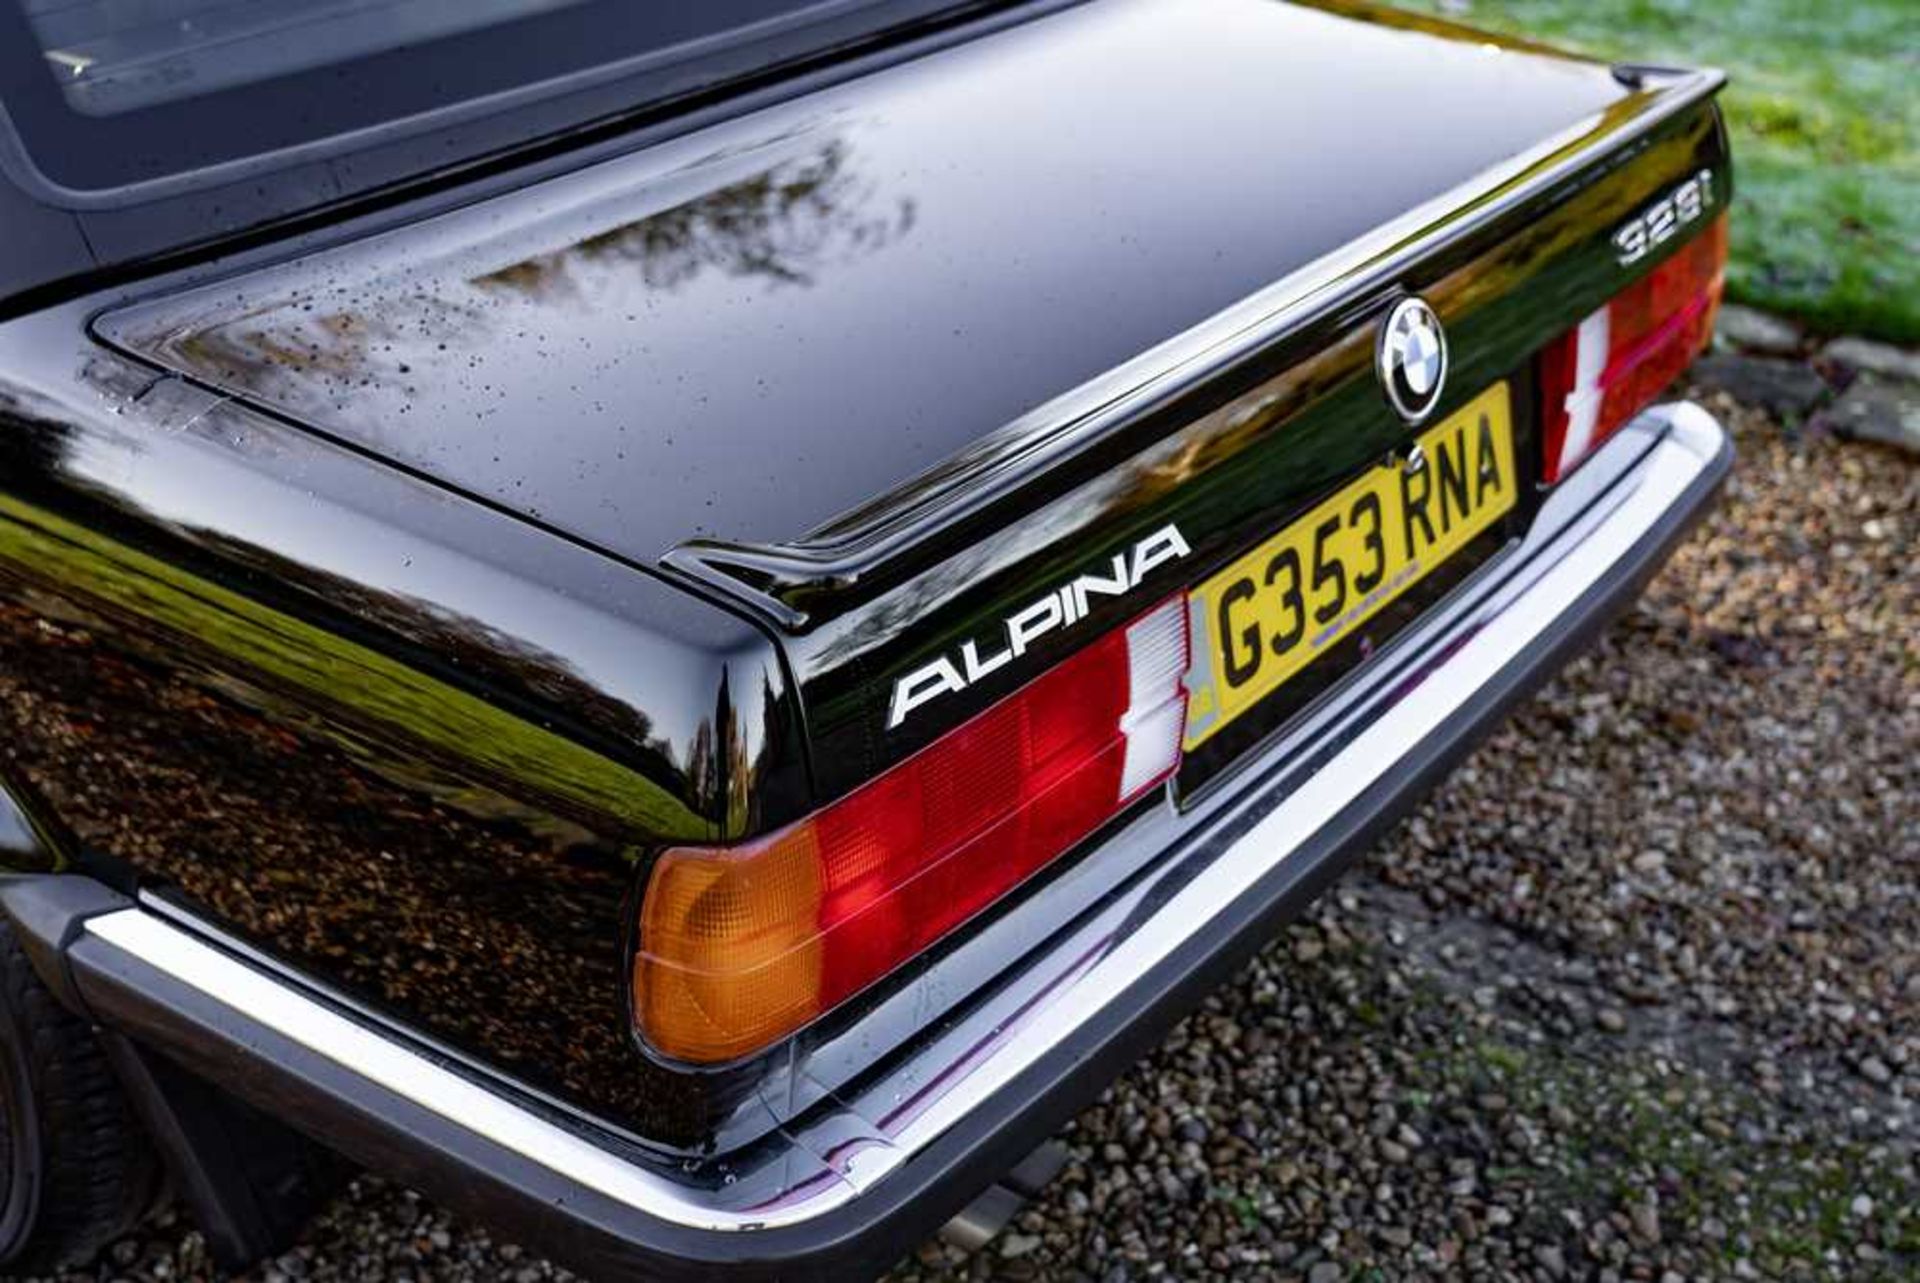 1989 BMW 320i Convertible Converted to Alpina 328i Specification - Image 25 of 51